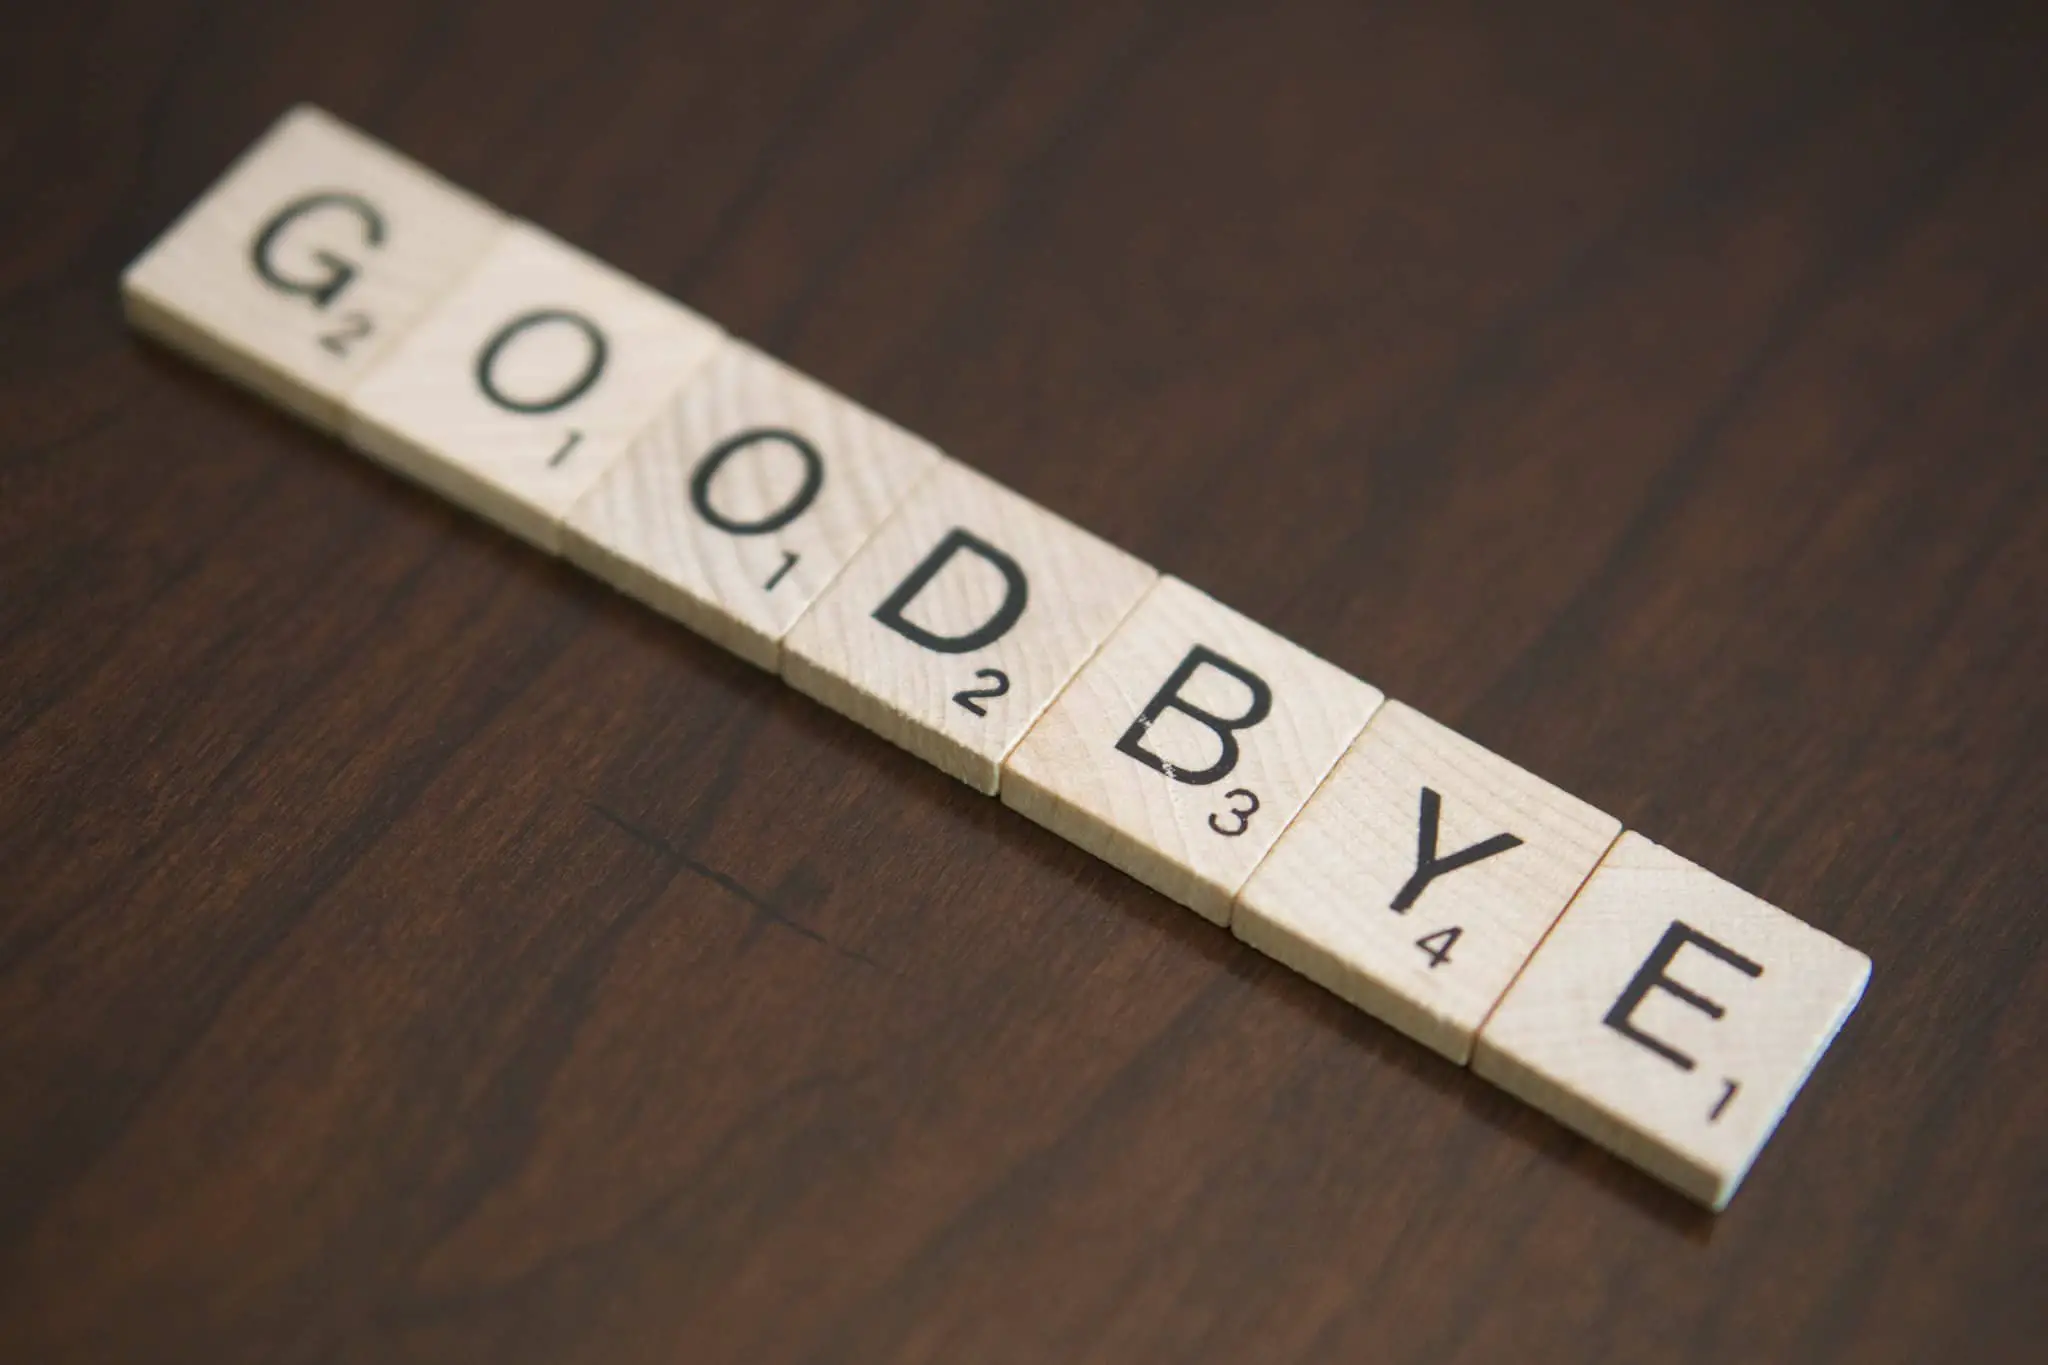 Scrabble letters spelling out Goodbye by Sharon Sinclair